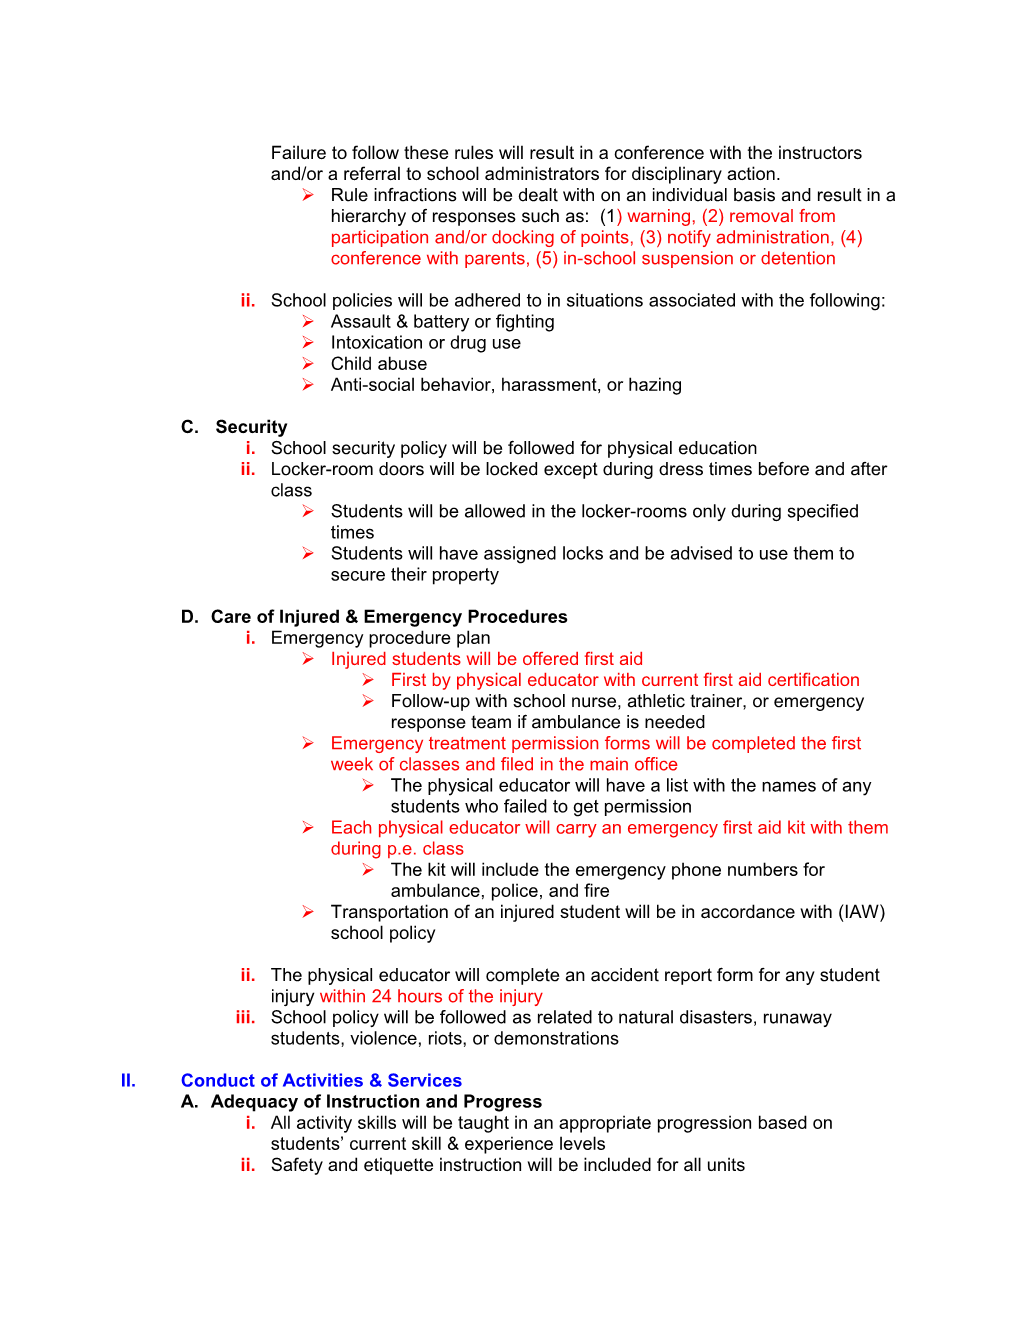 Example Risk Management Plan For Physical Education